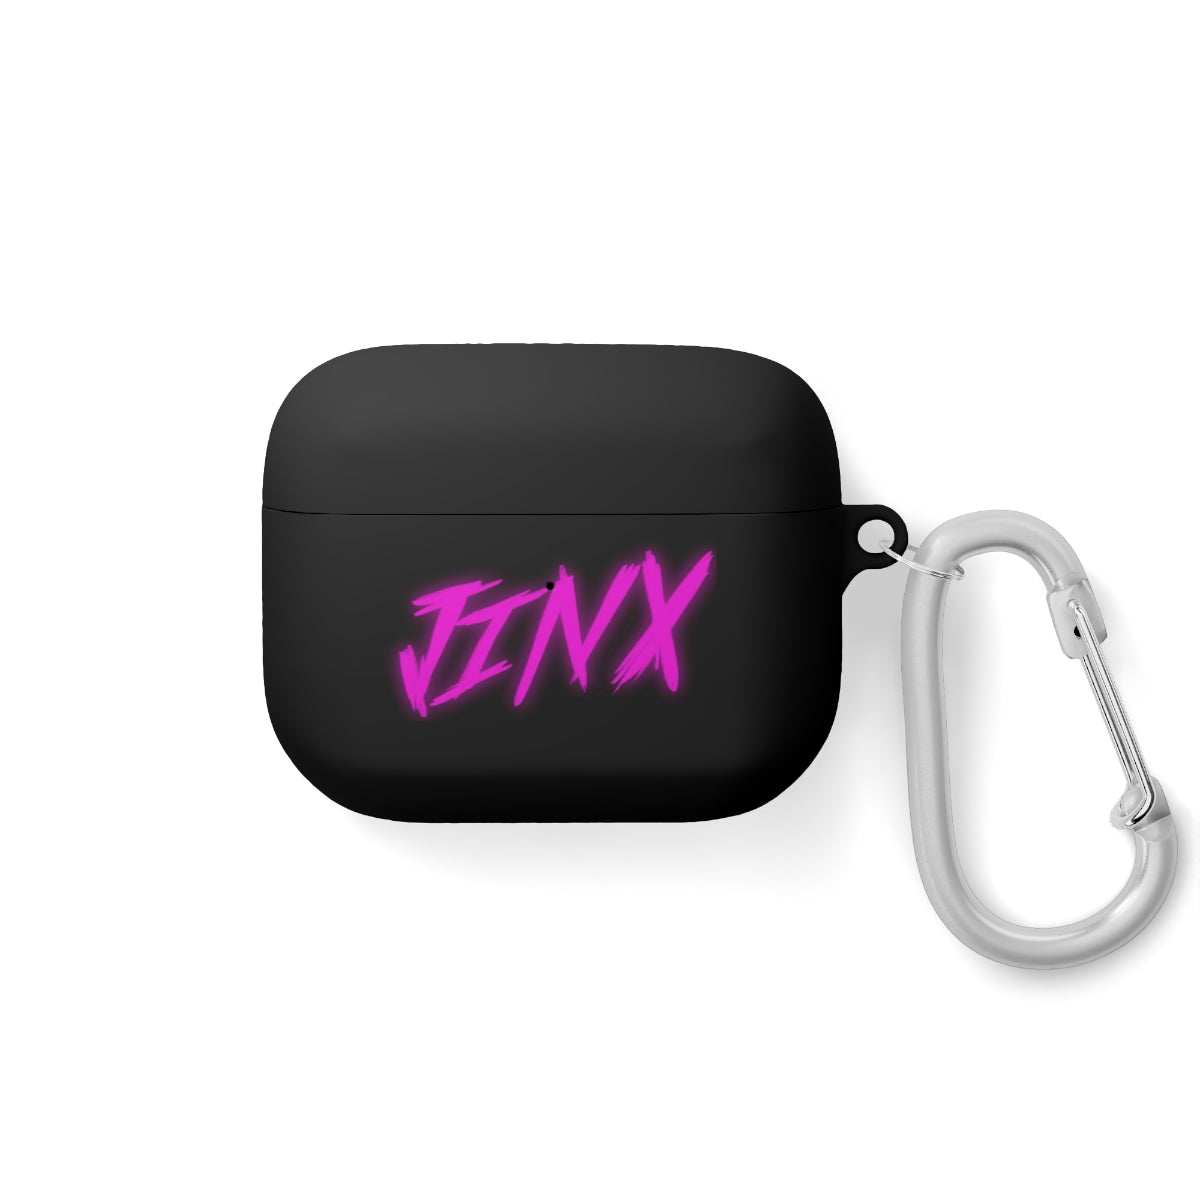 røgelse slidbane Specialitet Jinx (AirPods and AirPods Pro Case Cover) – Rebellious by Ary